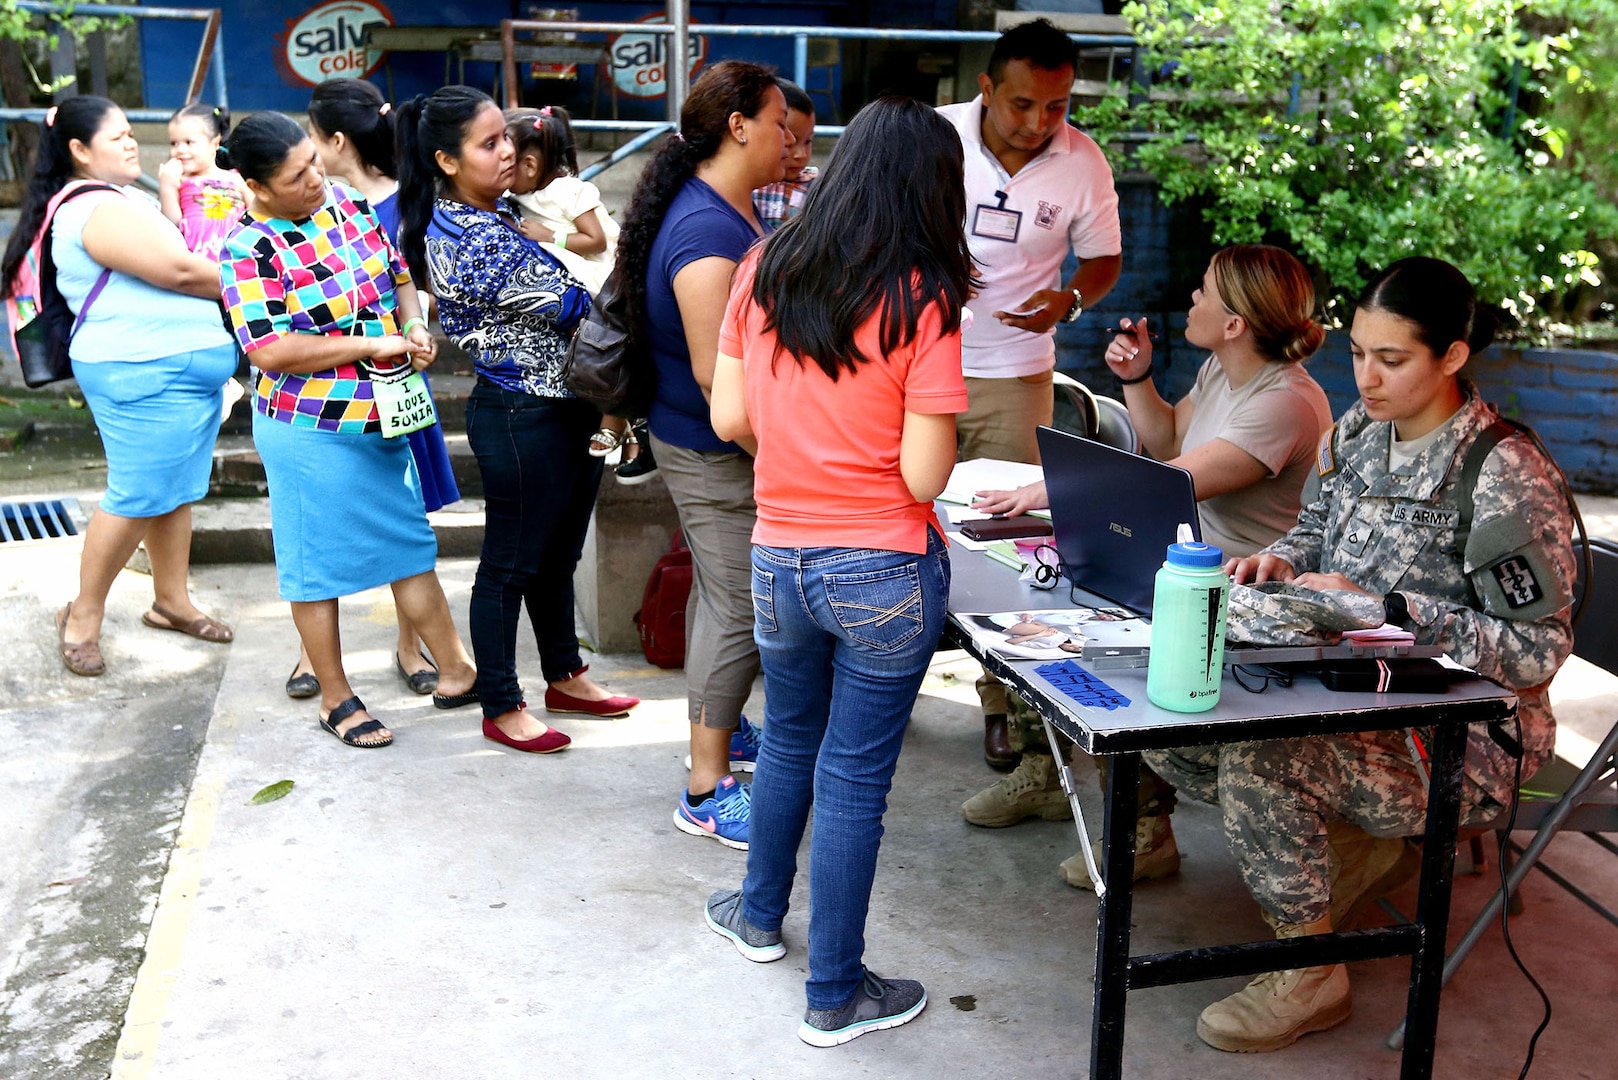 Medical staff from Combined Joint Task Force Hope check in local nationals during a Medical Readiness Training Exercise in Canton Espino Abajo as part of Beyond the Horizon 2018 May 28. Beyond the Horizon 2018 is a combined readiness exercise between U.S. Southern Command and El Salvador which provides medical campaigns and construction projects for several communities throughout the La Paz Department in the Central American country.